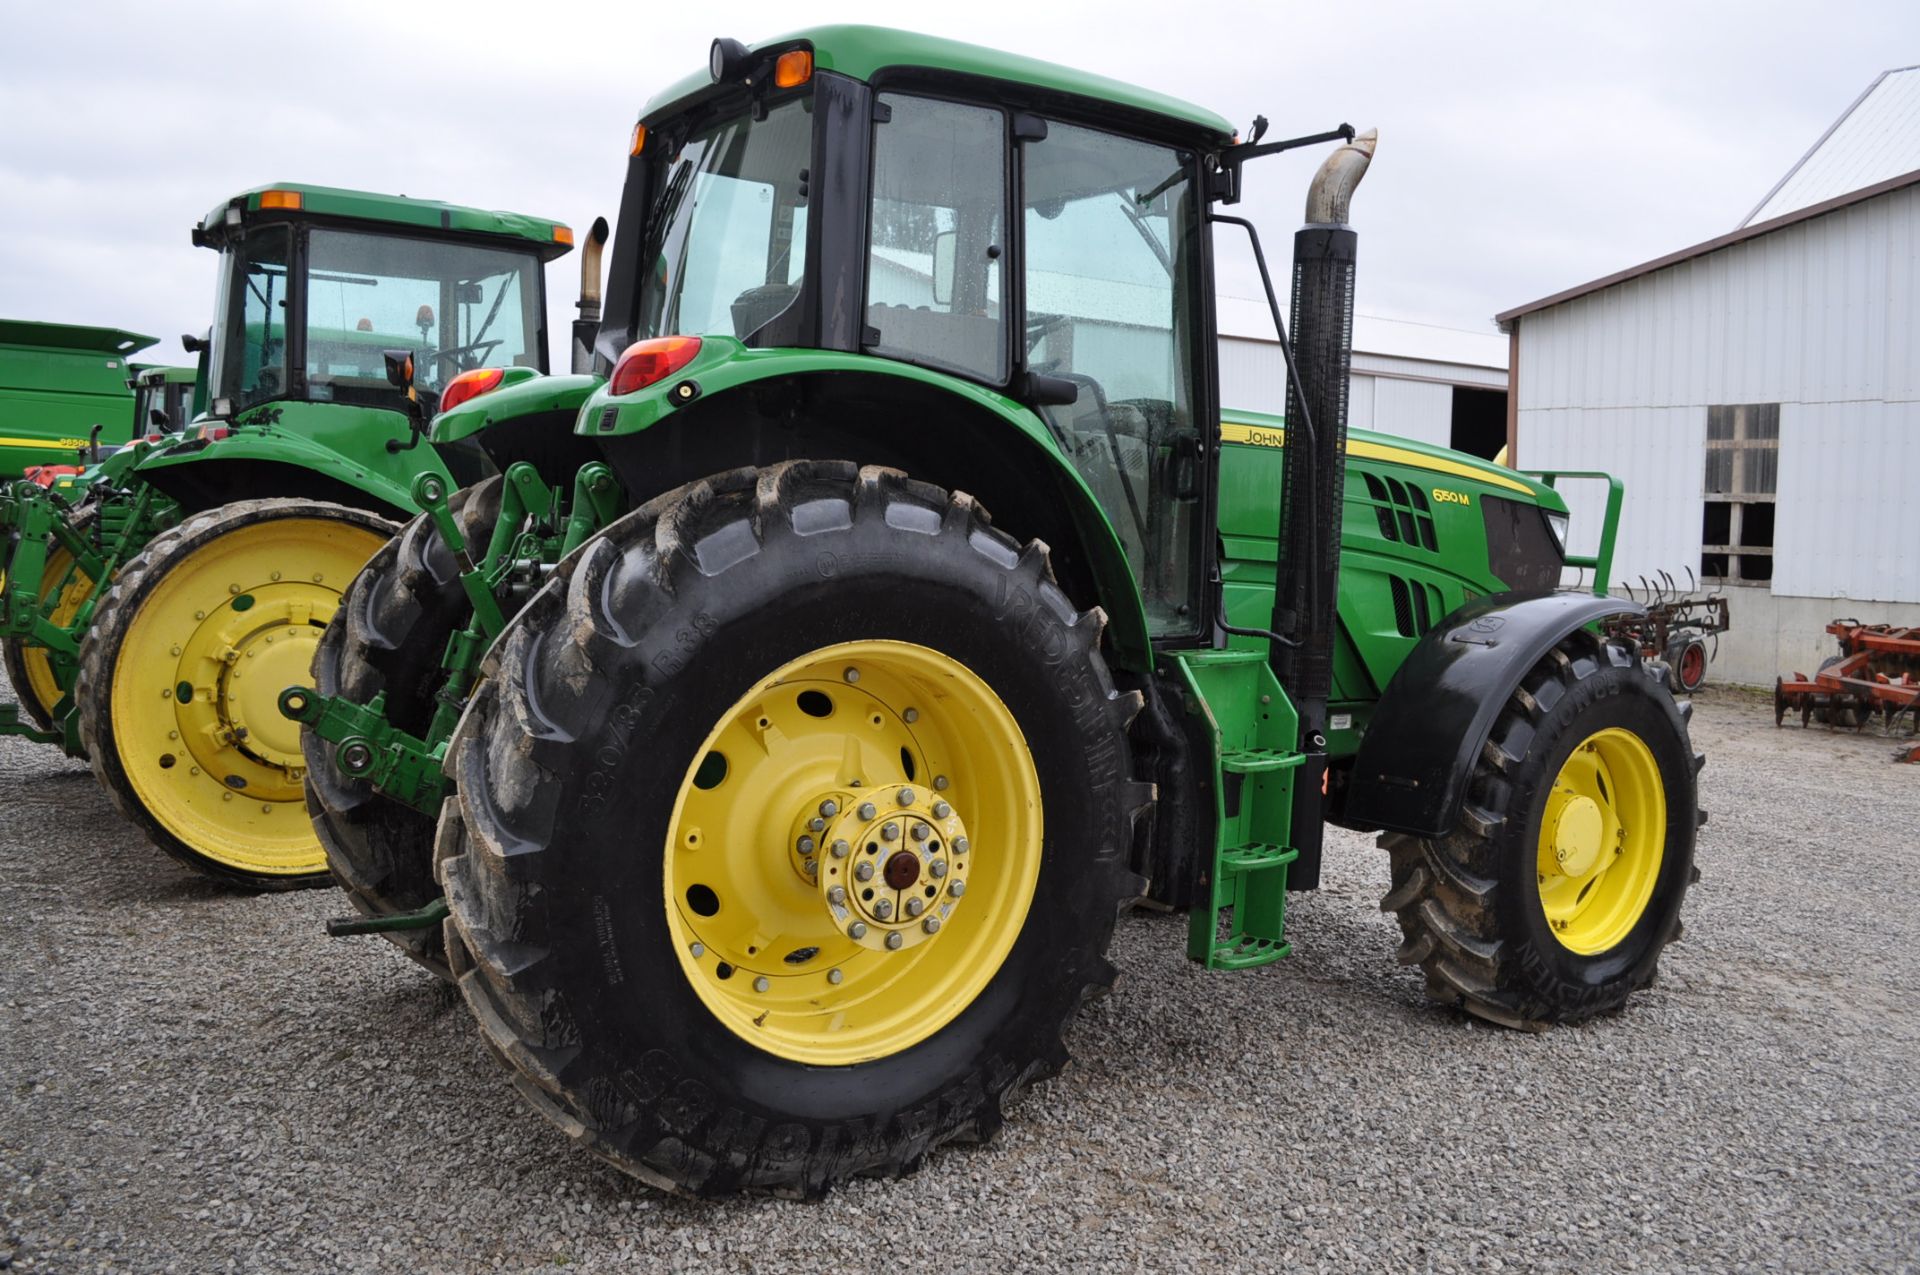 John Deere 6150M tractor, MFWD, C/H/A, 620/85 R 38 rear, 420/85 R 28 front, front fenders, - Image 3 of 20